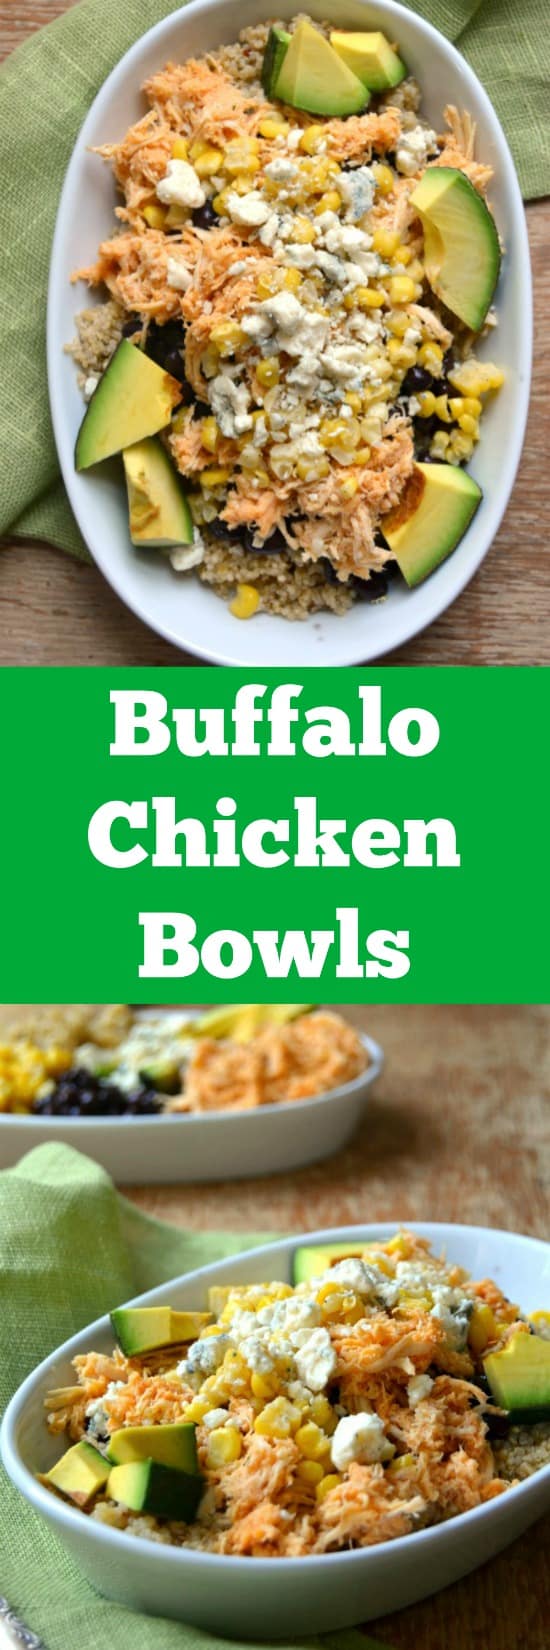 Buffalo Chicken Bowls - delicious, healthy, and such a simple dinner! These bowls are so easy to make and loaded with good for you protein, fats and carbs